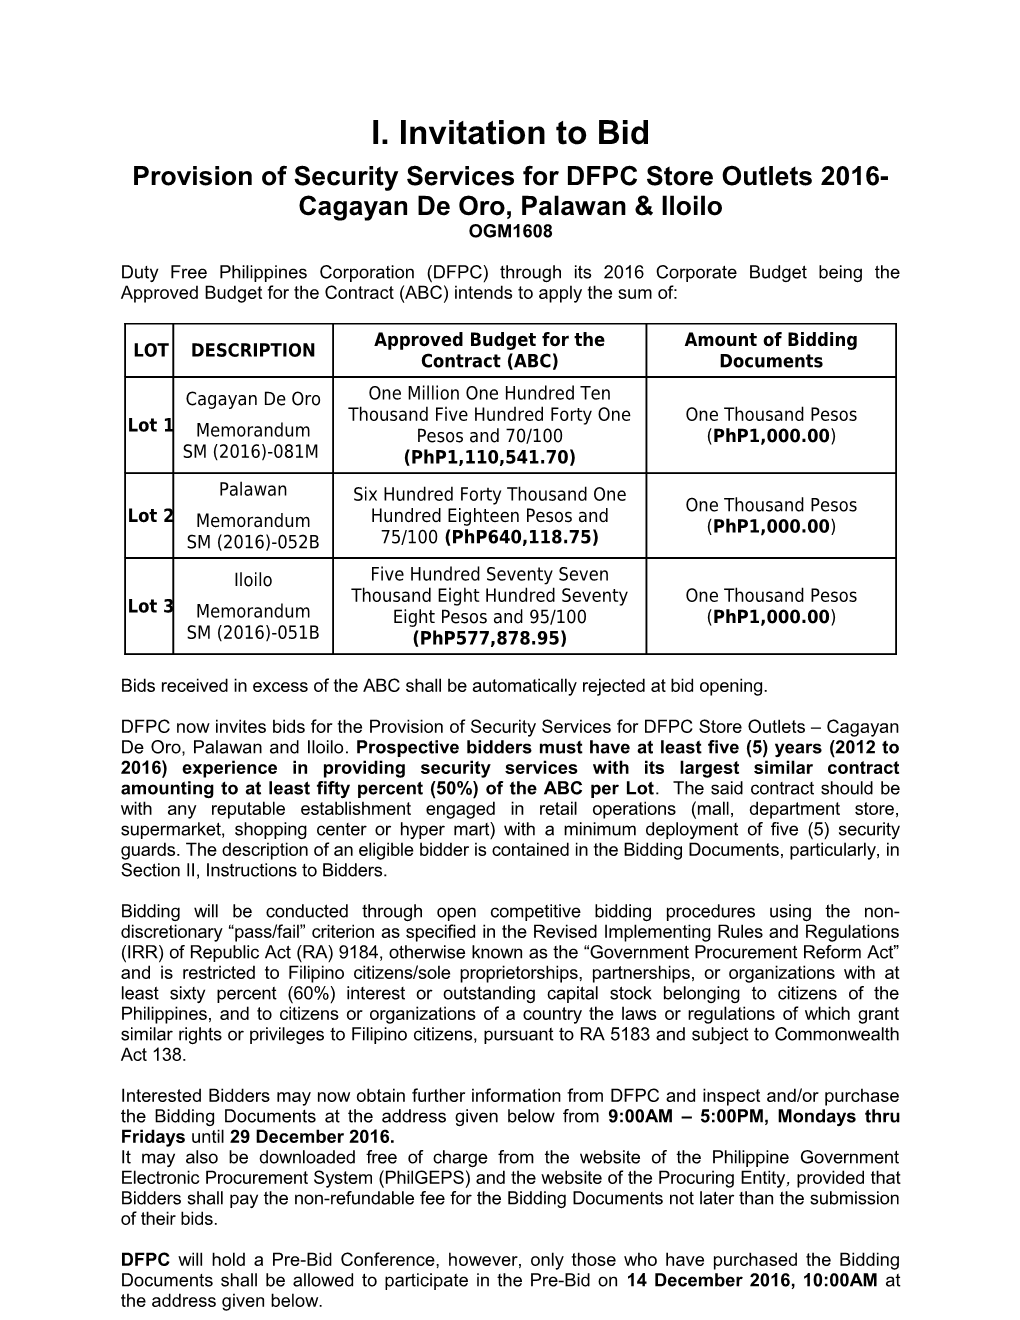 Provision of Security Services for DFPC Store Outlets 2016-Cagayan De Oro, Palawan & Iloilo